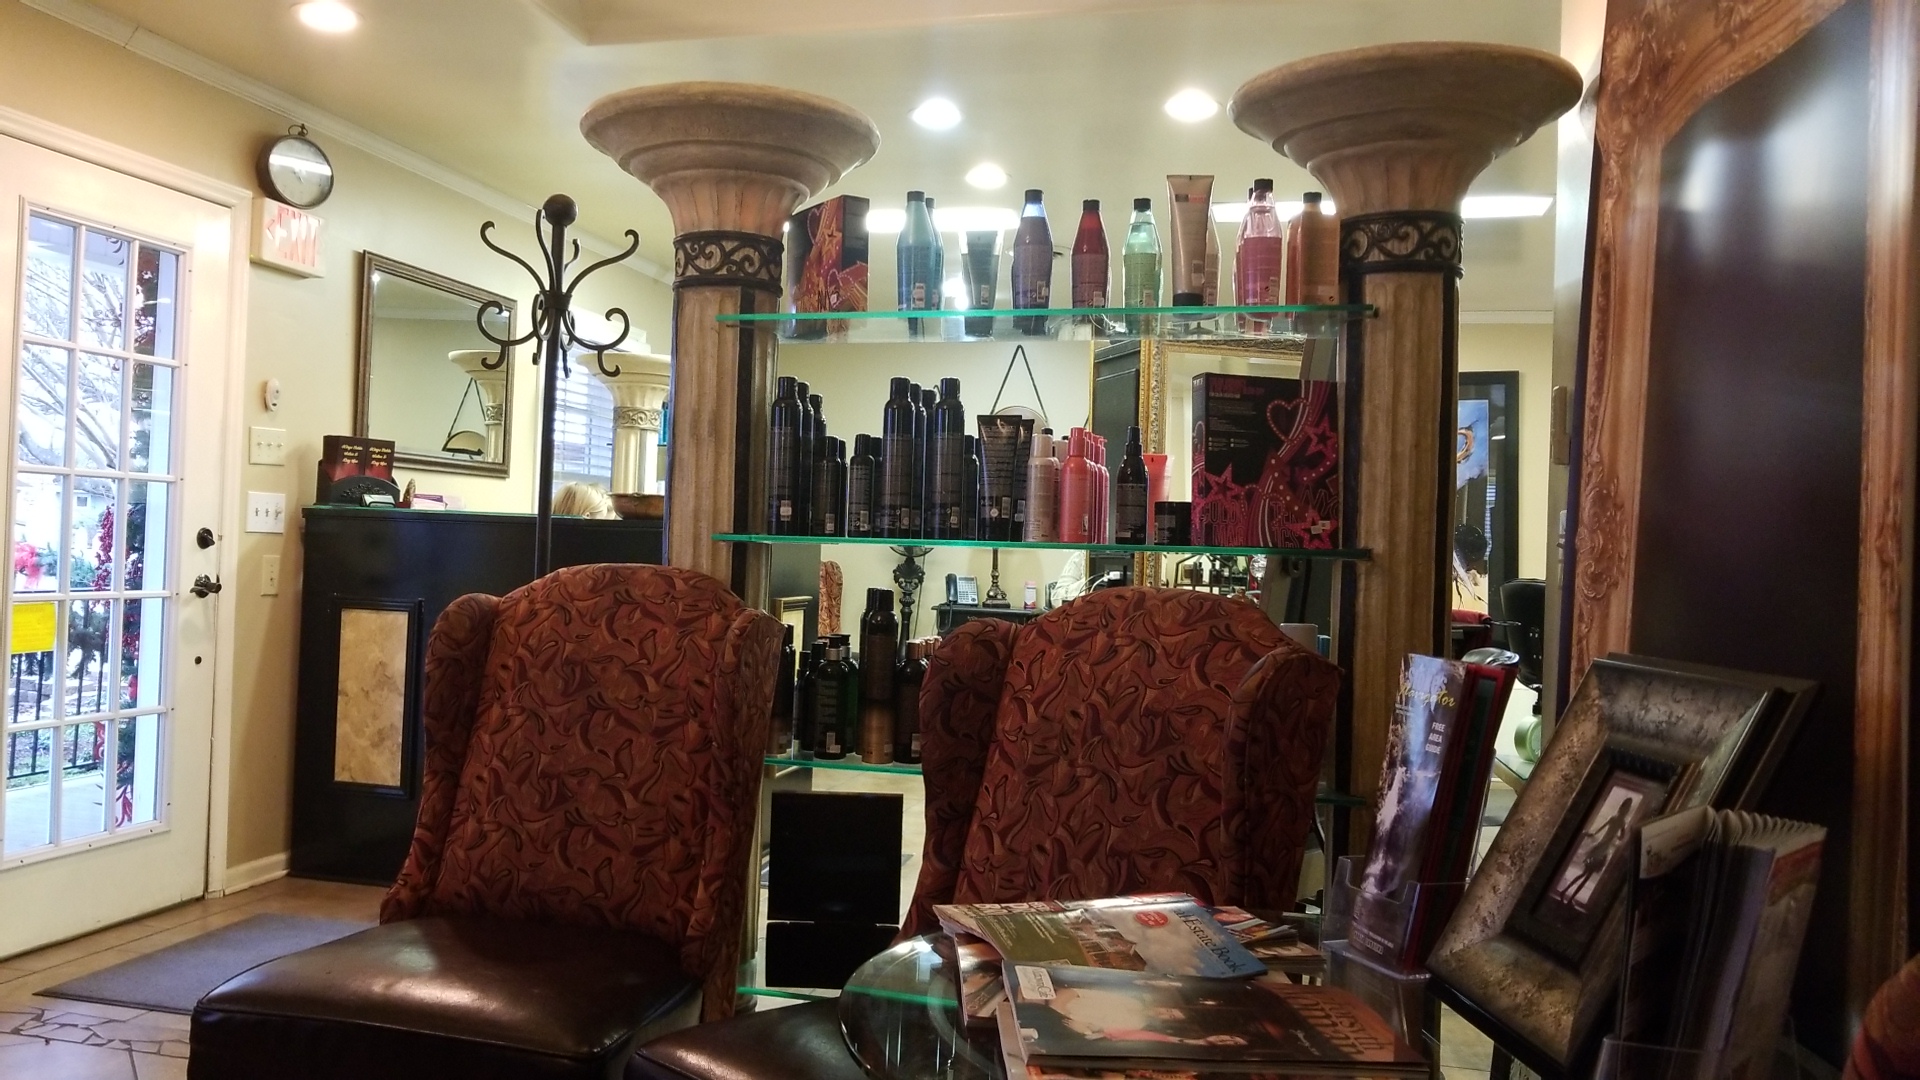 King's Cabin Salon and Day Spa